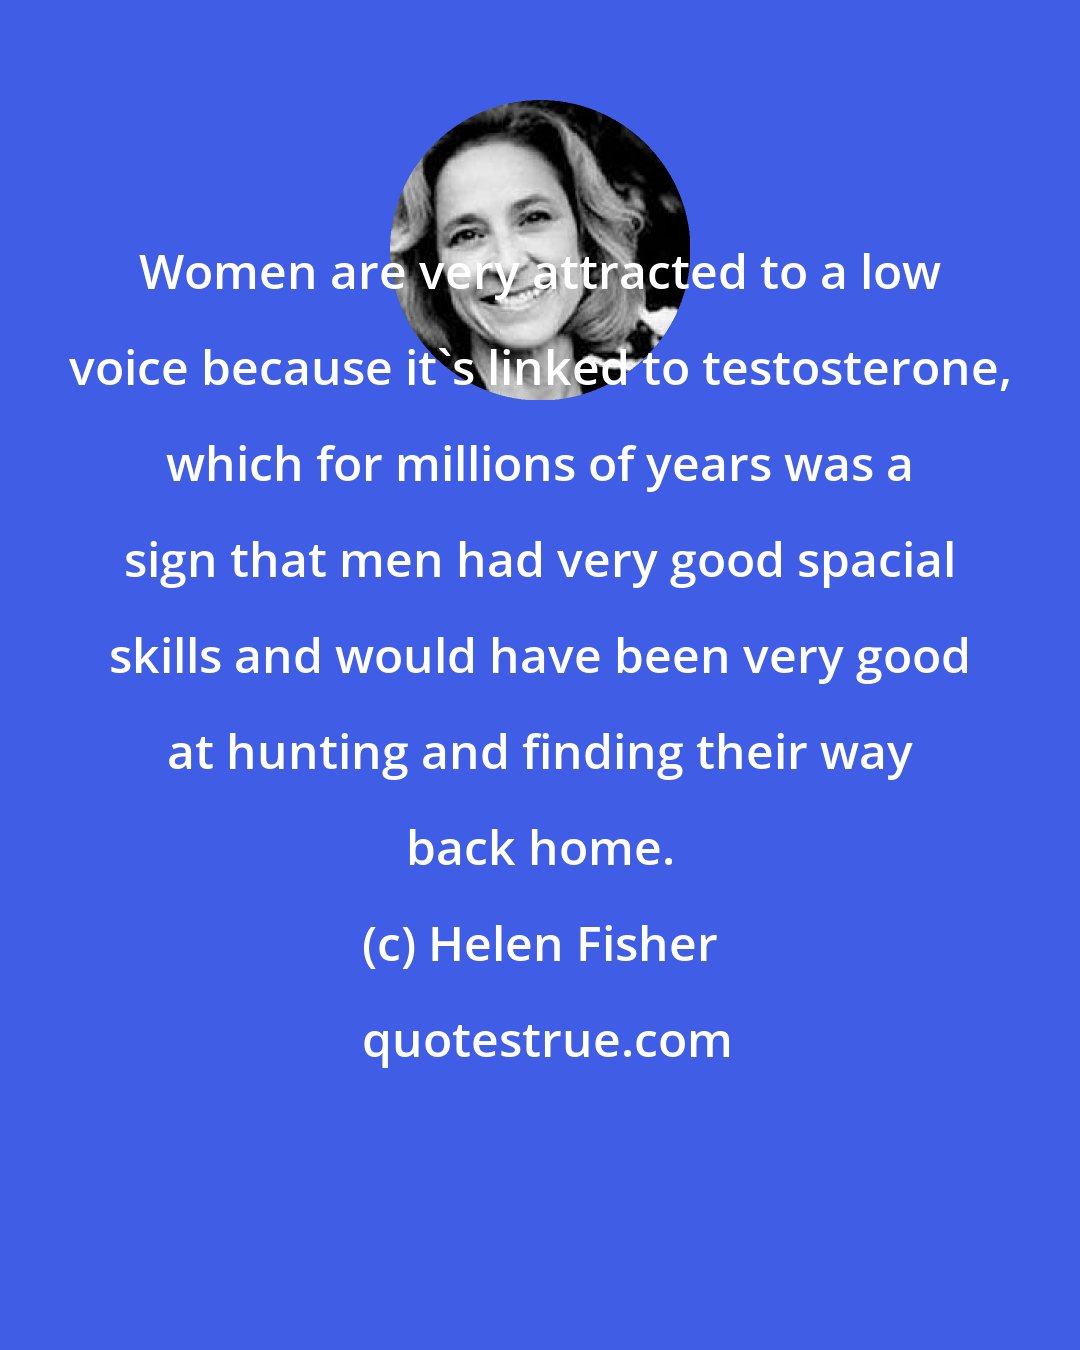 Helen Fisher: Women are very attracted to a low voice because it's linked to testosterone, which for millions of years was a sign that men had very good spacial skills and would have been very good at hunting and finding their way back home.